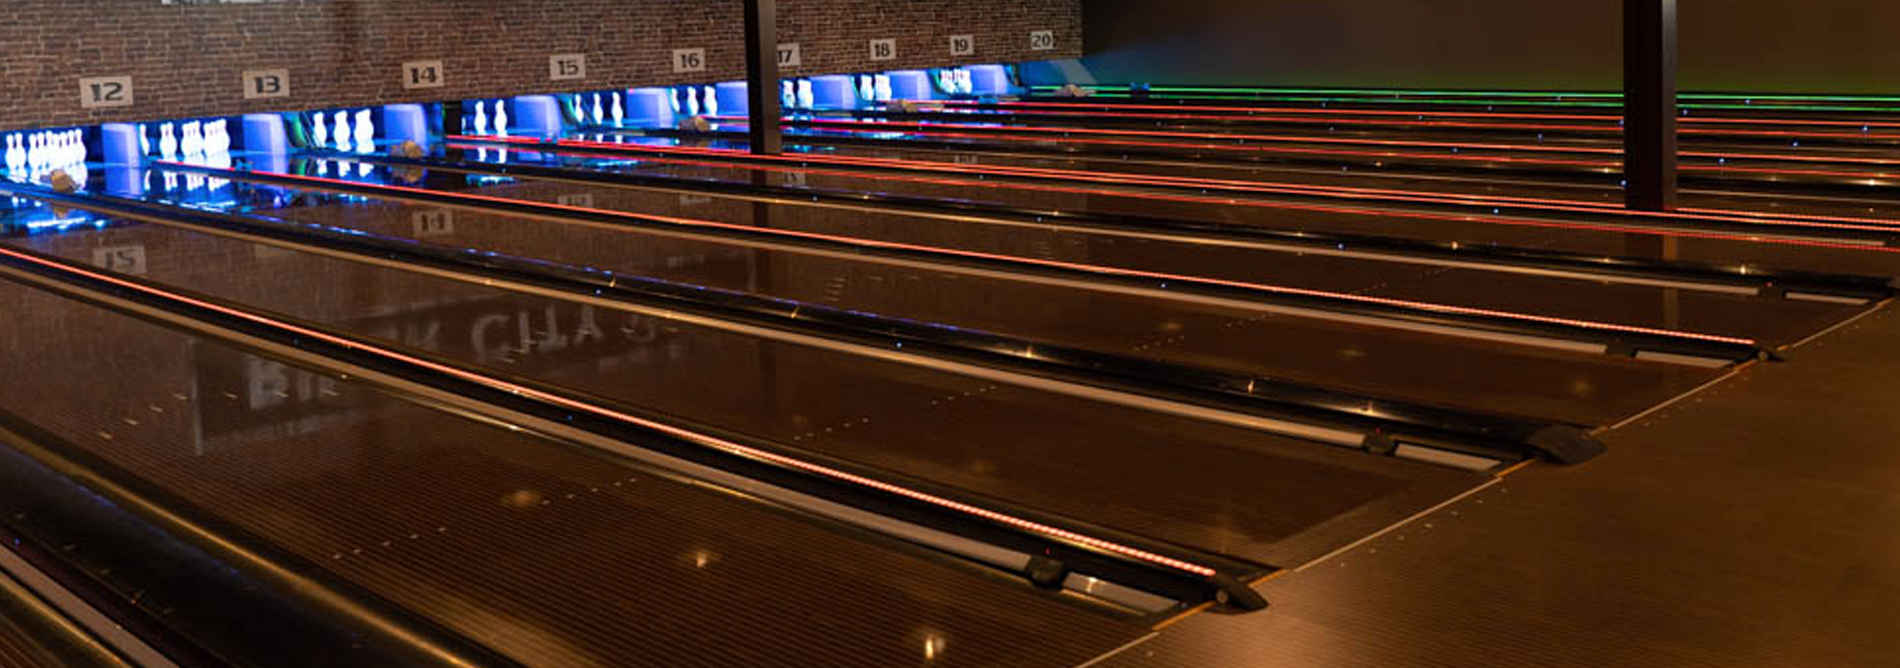 Bowling-QubicaAMF-CAPPING-LIGHTS-Brochures-banner.jpg